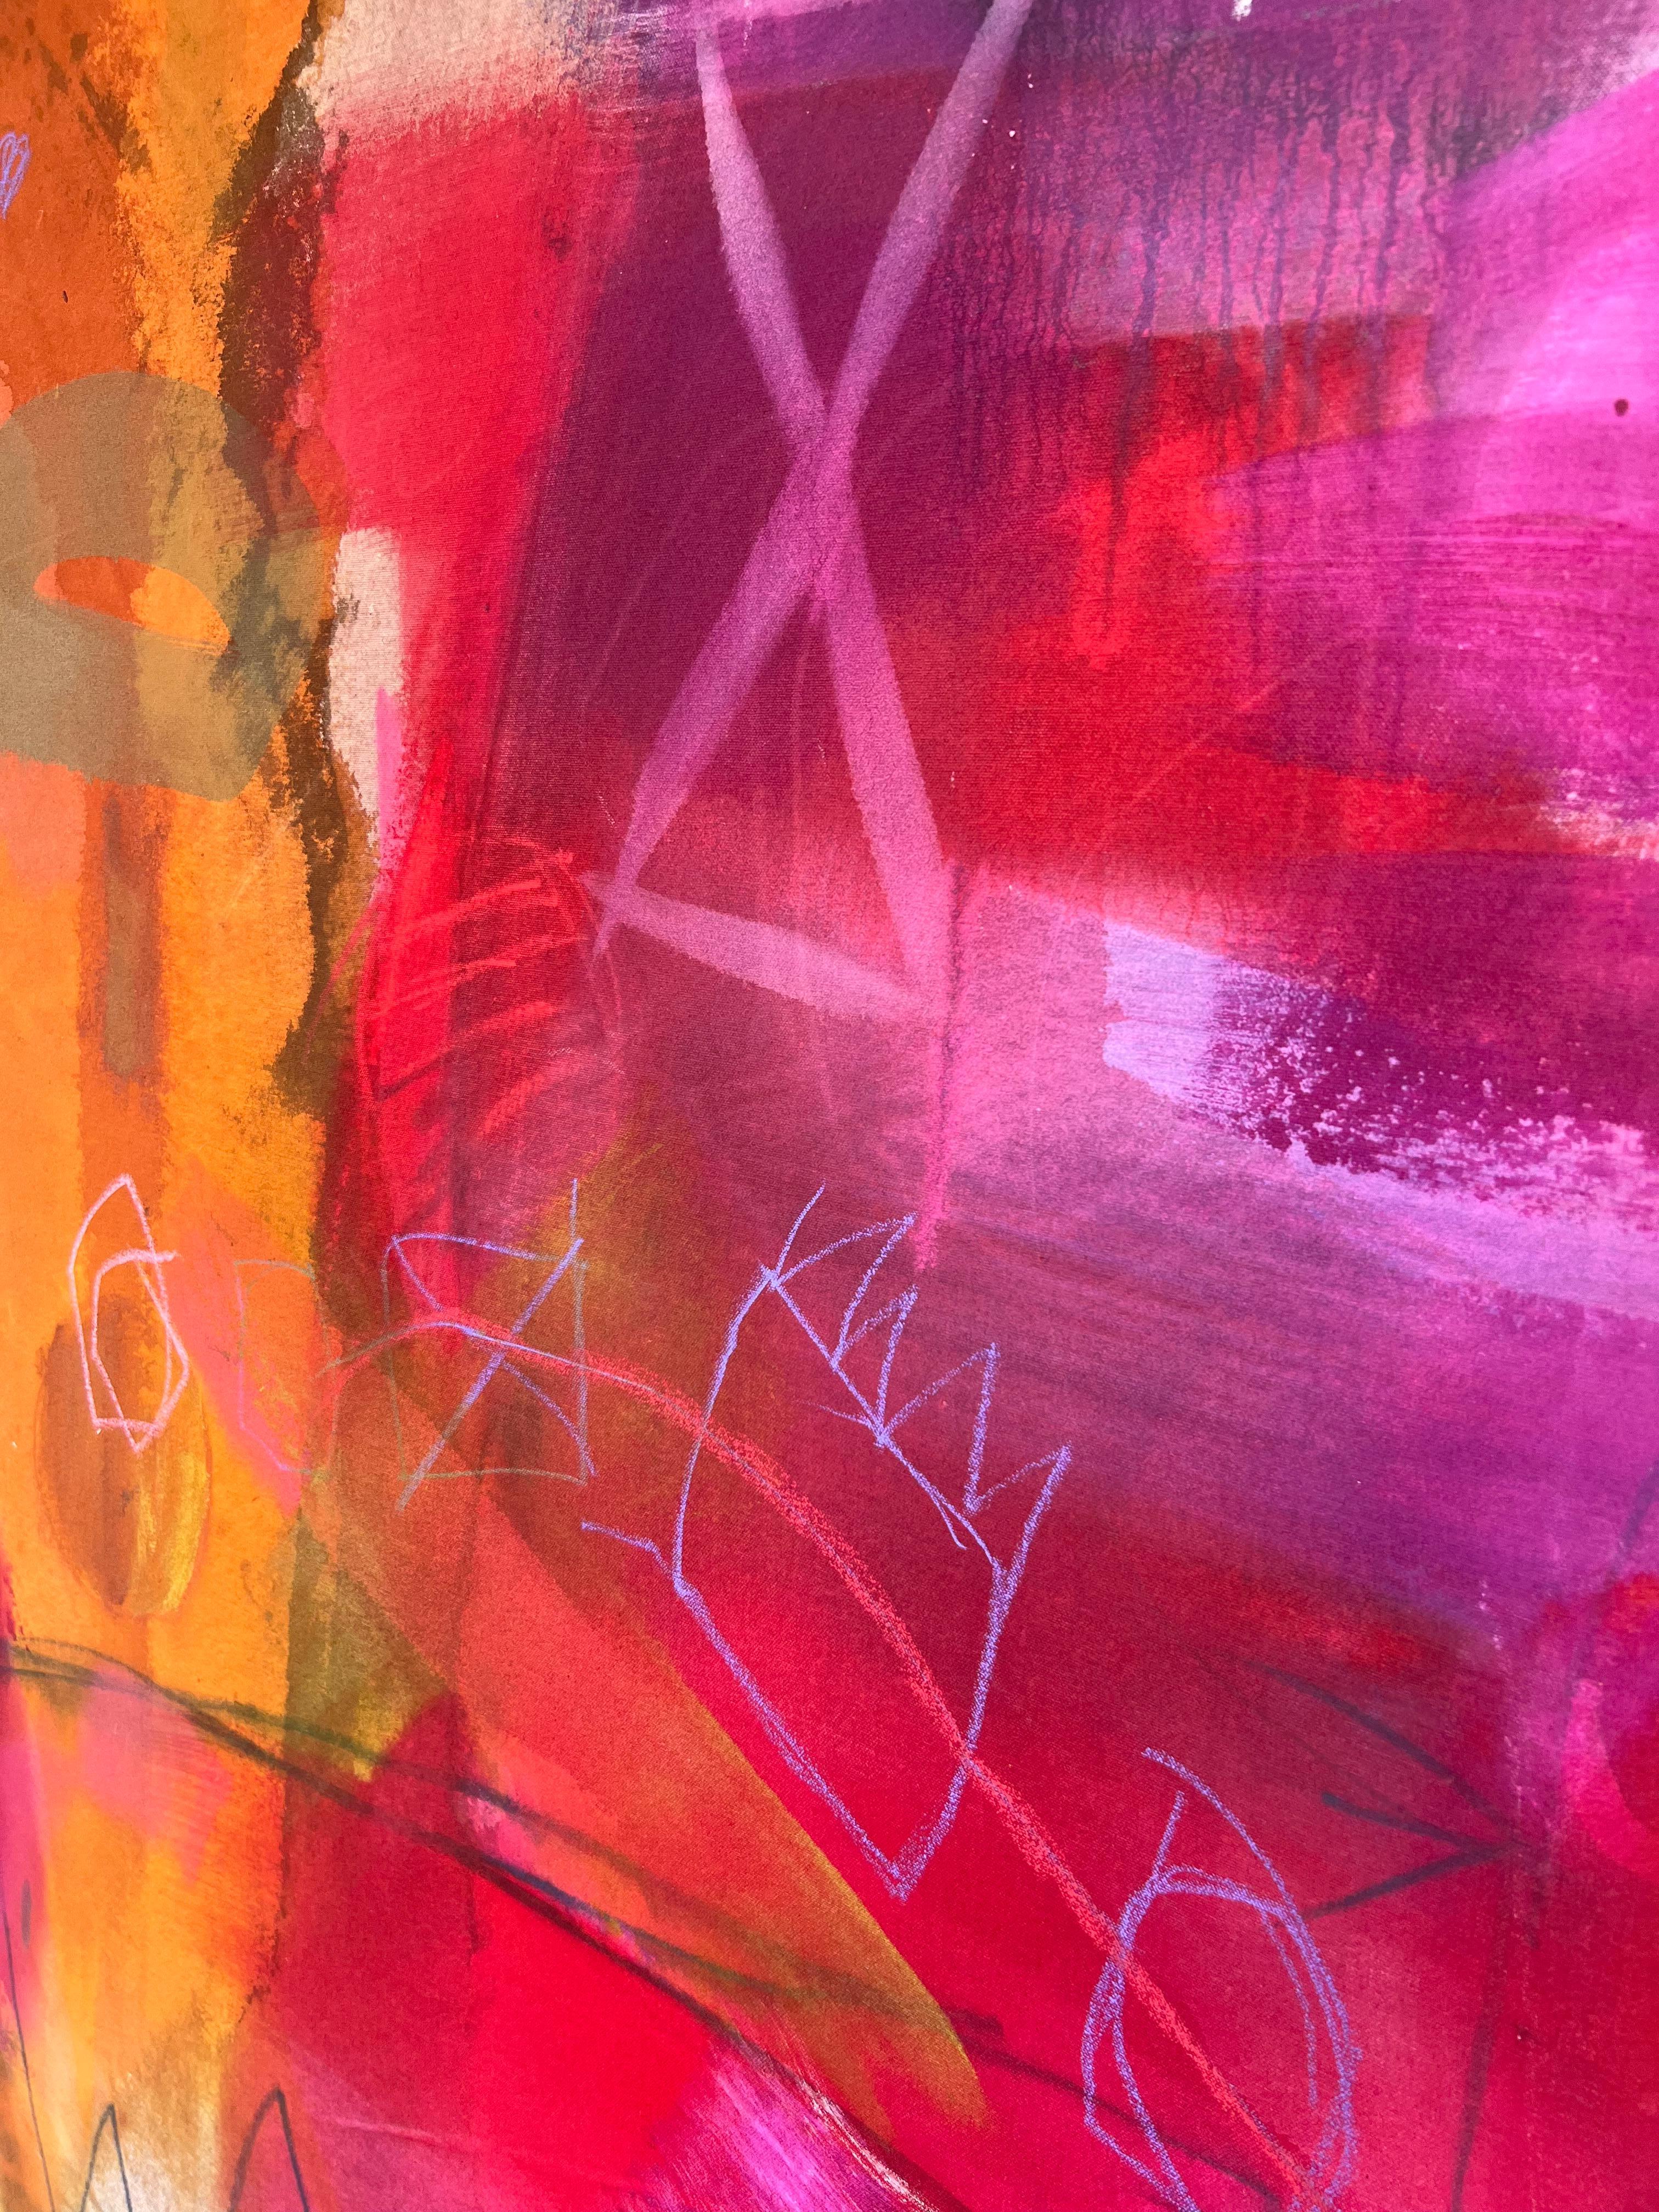 Gestural Abstraction_Pink/Orange/Purple_Mixed Media_Mozambique, Jane Booth 2022 For Sale 1